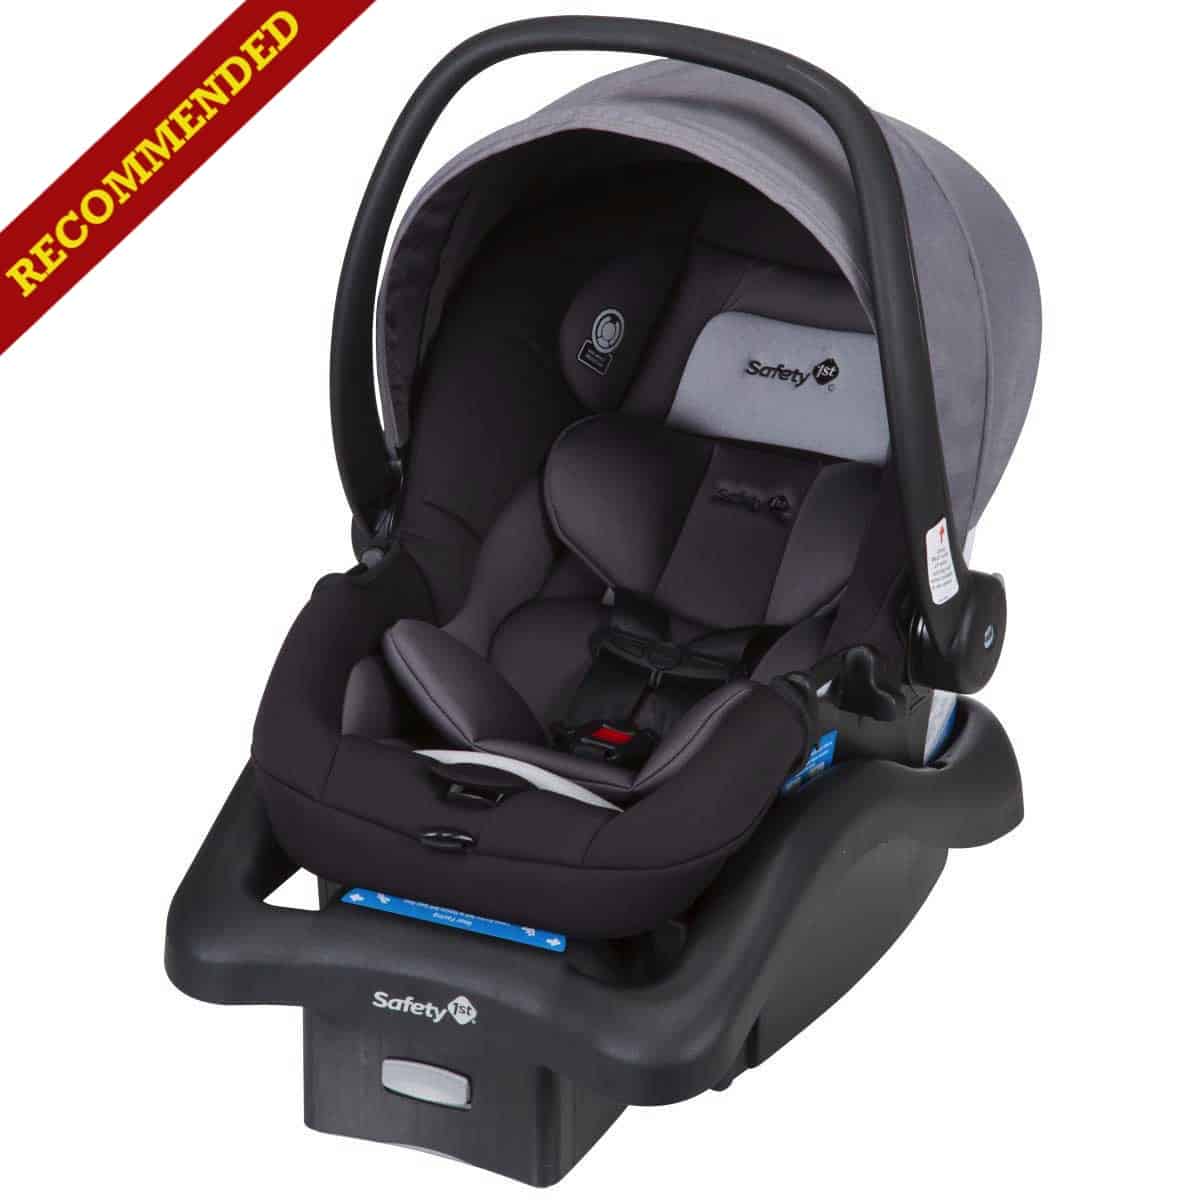 Recommended Seats Canada Car, Safest Infant Car Seat 2020 Canada